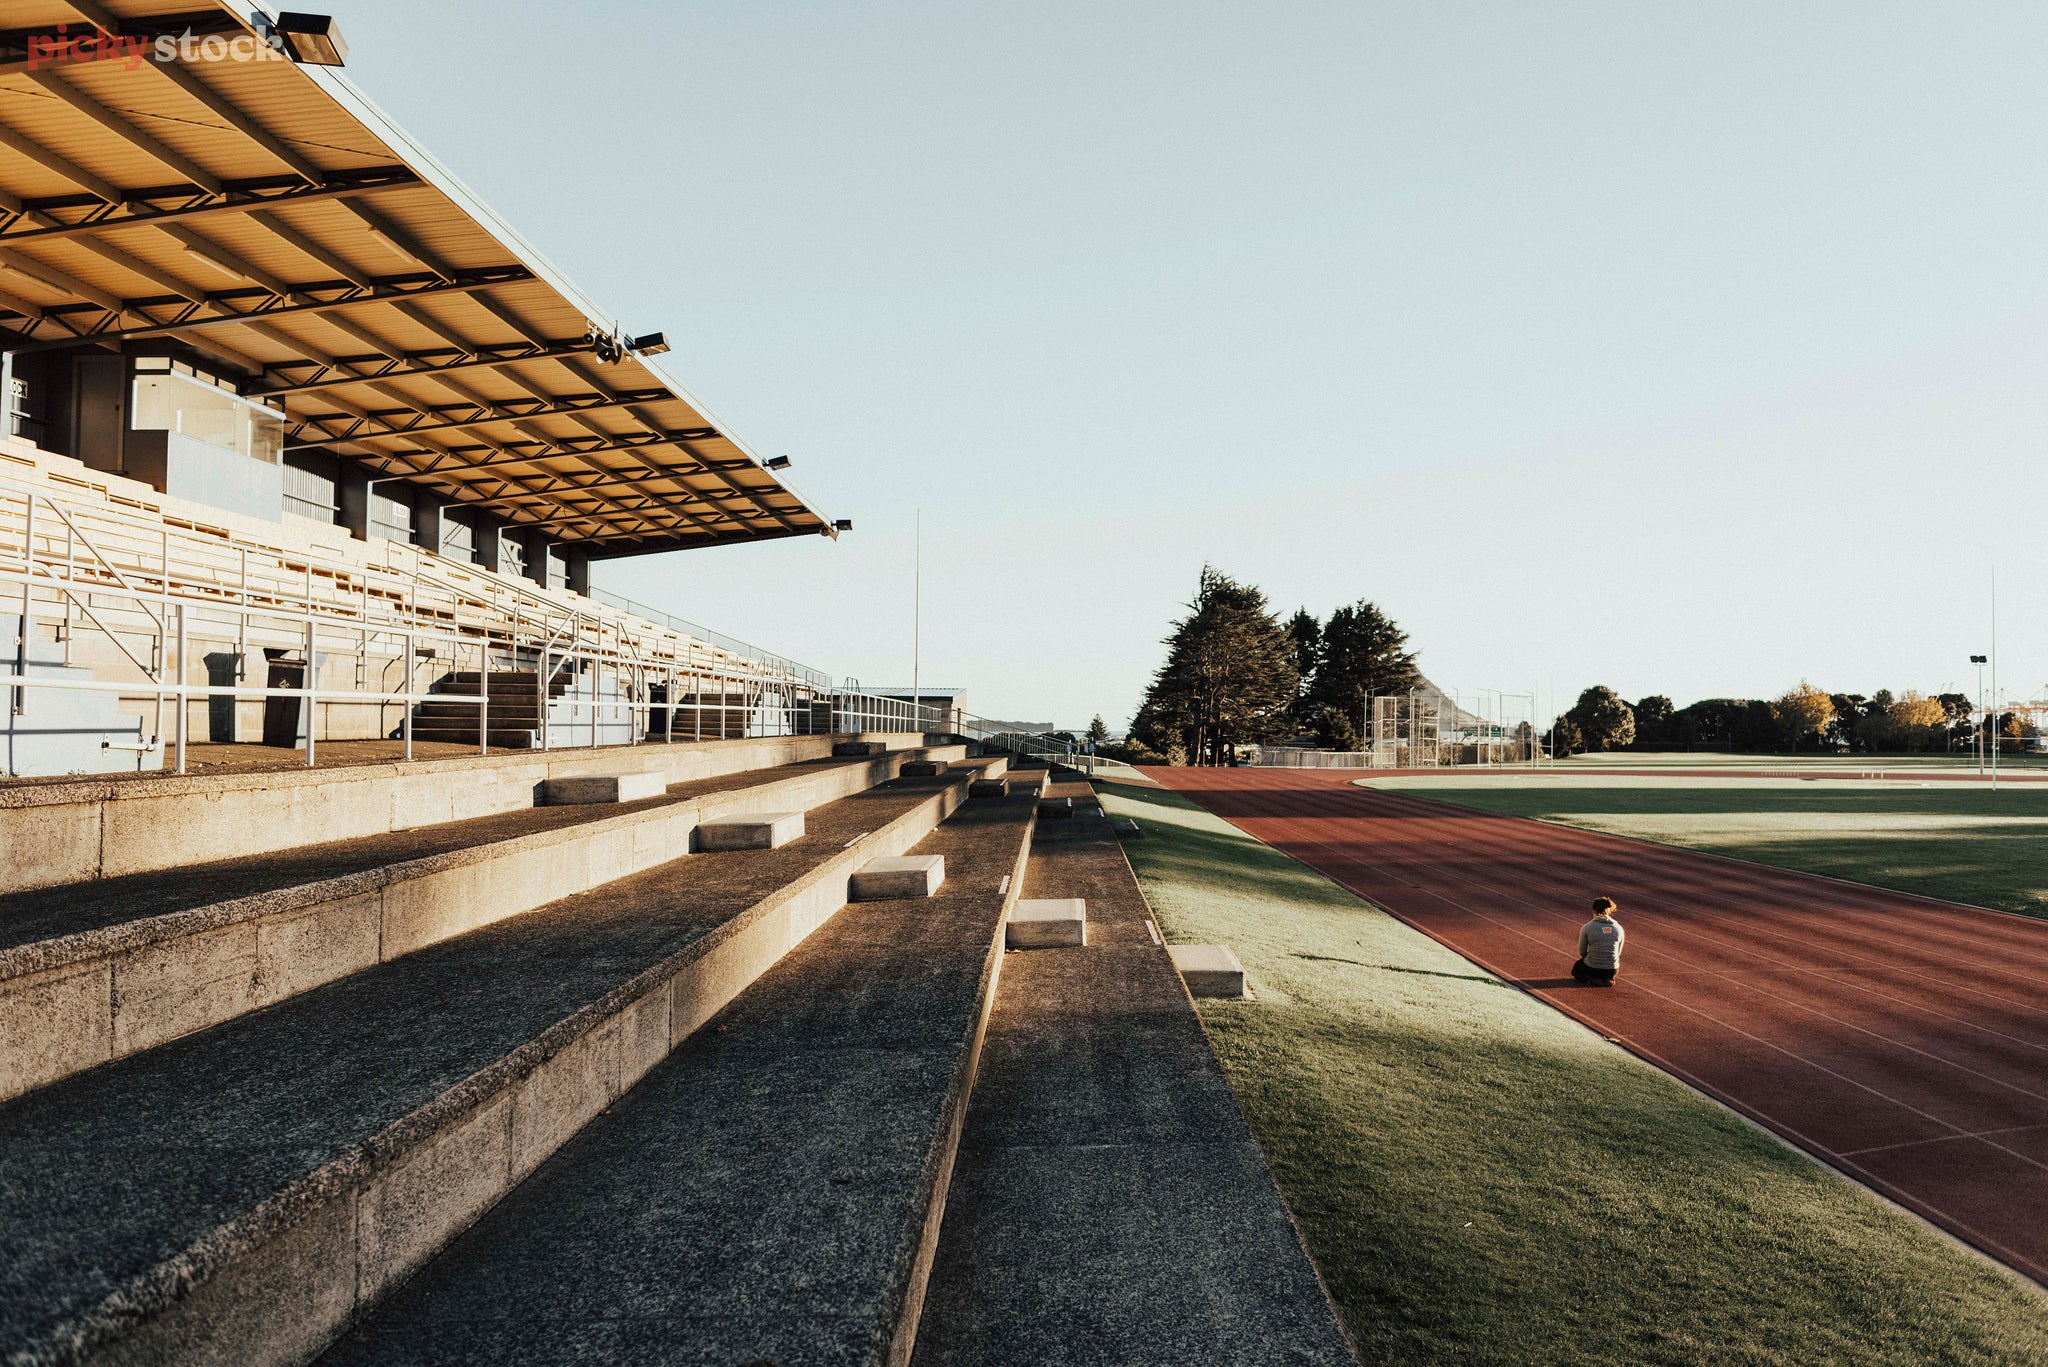 Young woman sits with her back to us on a running track in the early morning. Next to the track is a large stadium seating building.